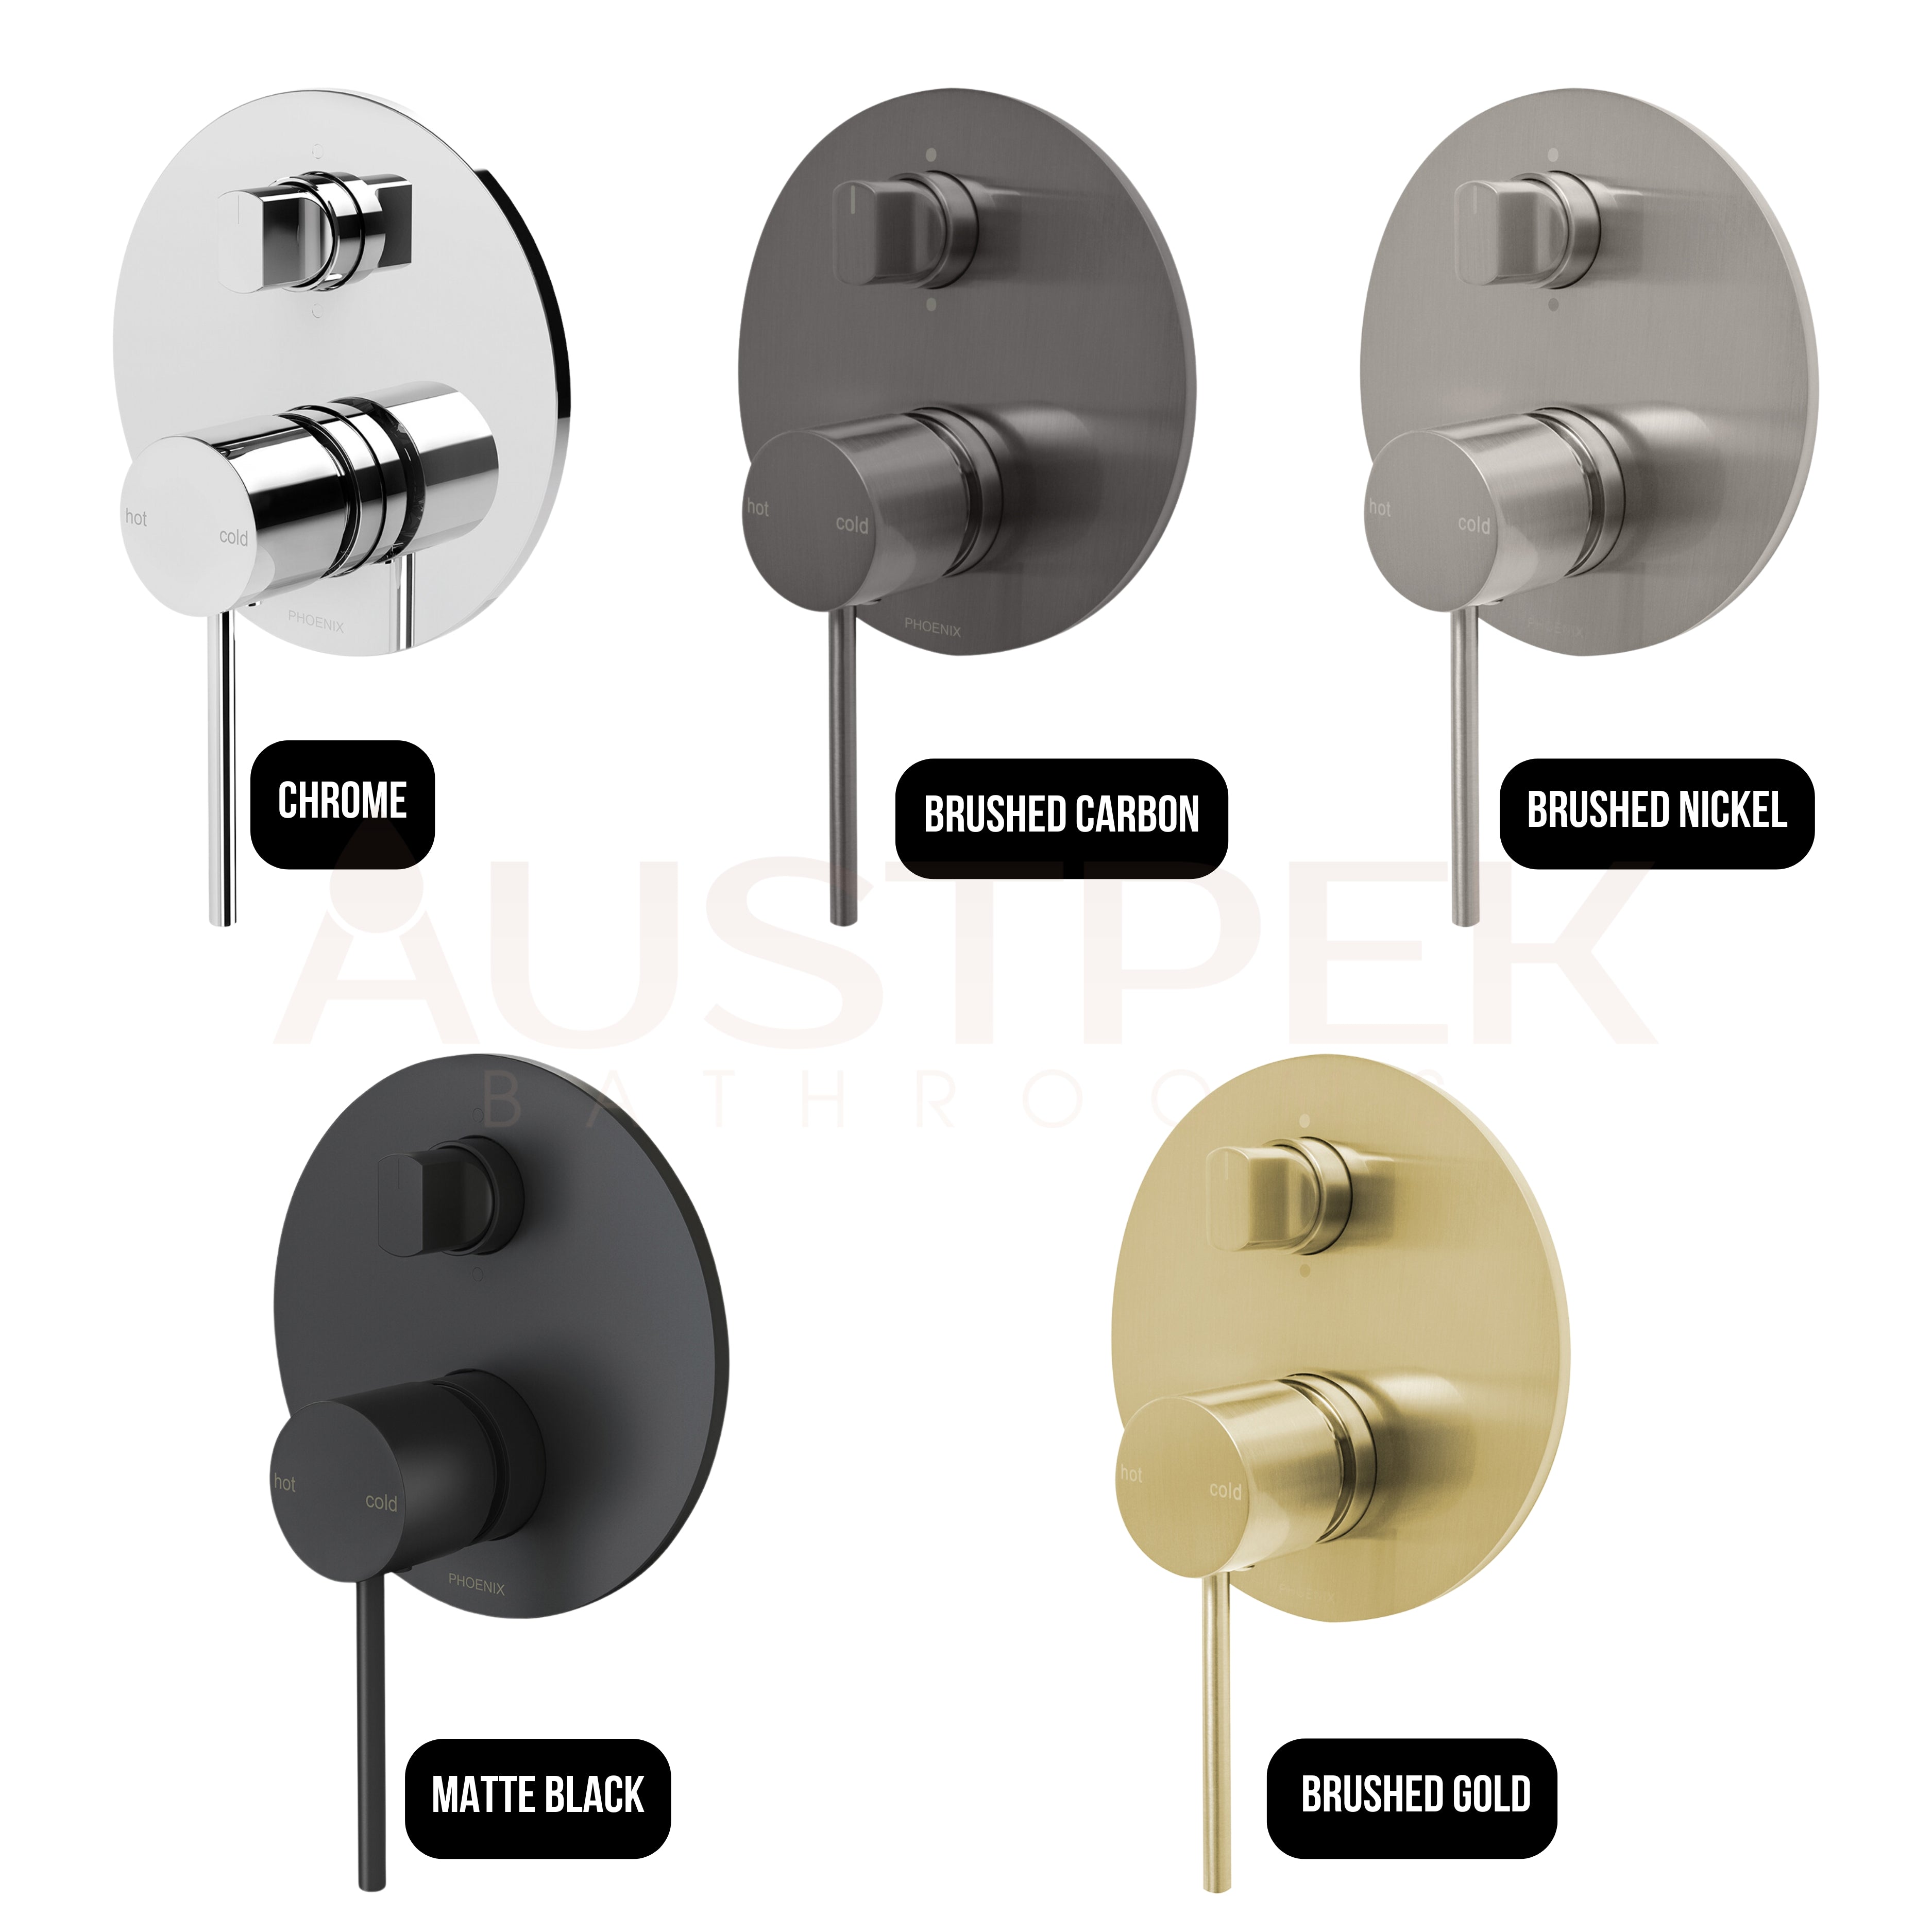 PHOENIX VIVID SLIMLINE SWITCHMIX SHOWER / BATH DIVERTER MIXER FIT-OFF AND ROUGH-IN KIT BRUSHED NICKEL